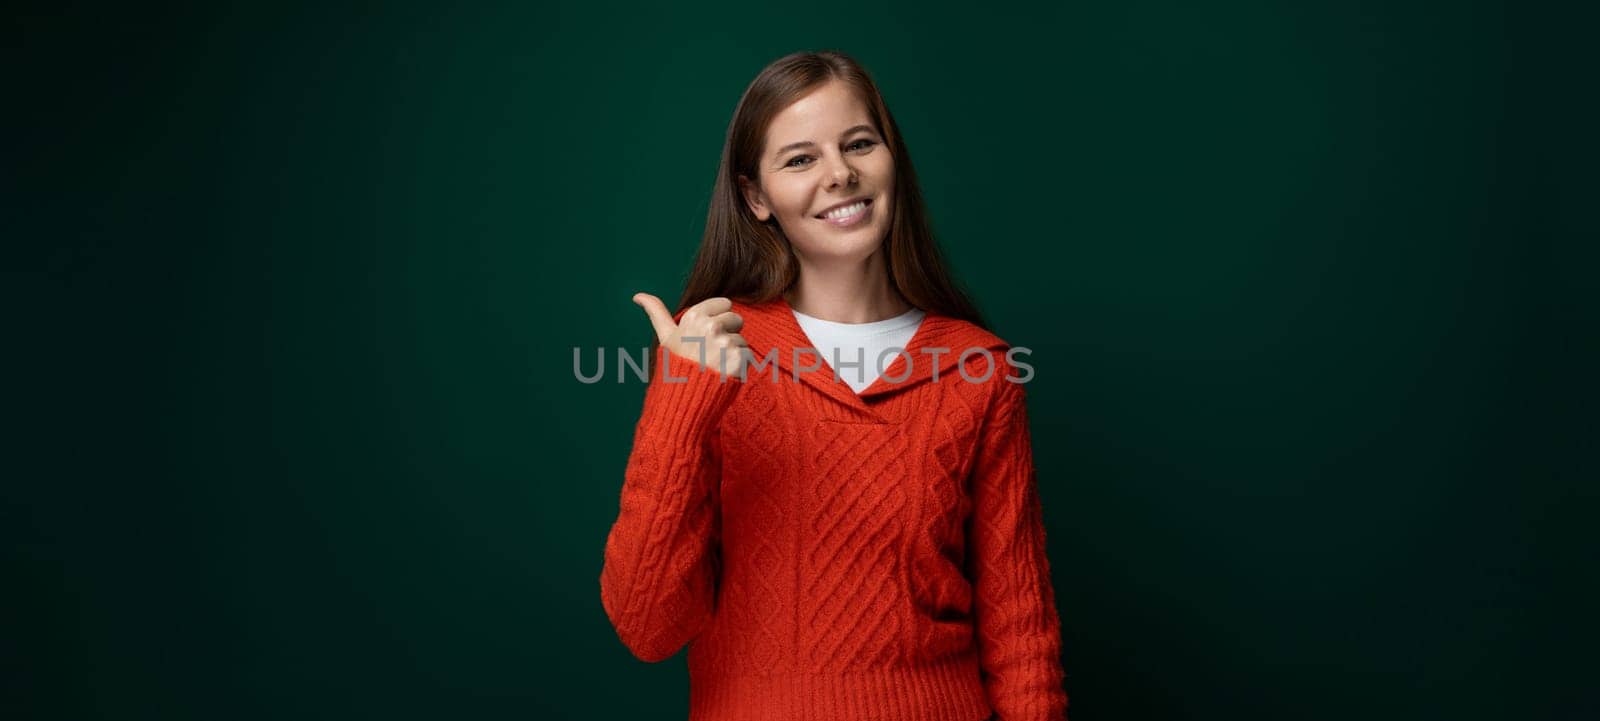 Successful Caucasian woman with brown hair wearing a red sweater on a green background.